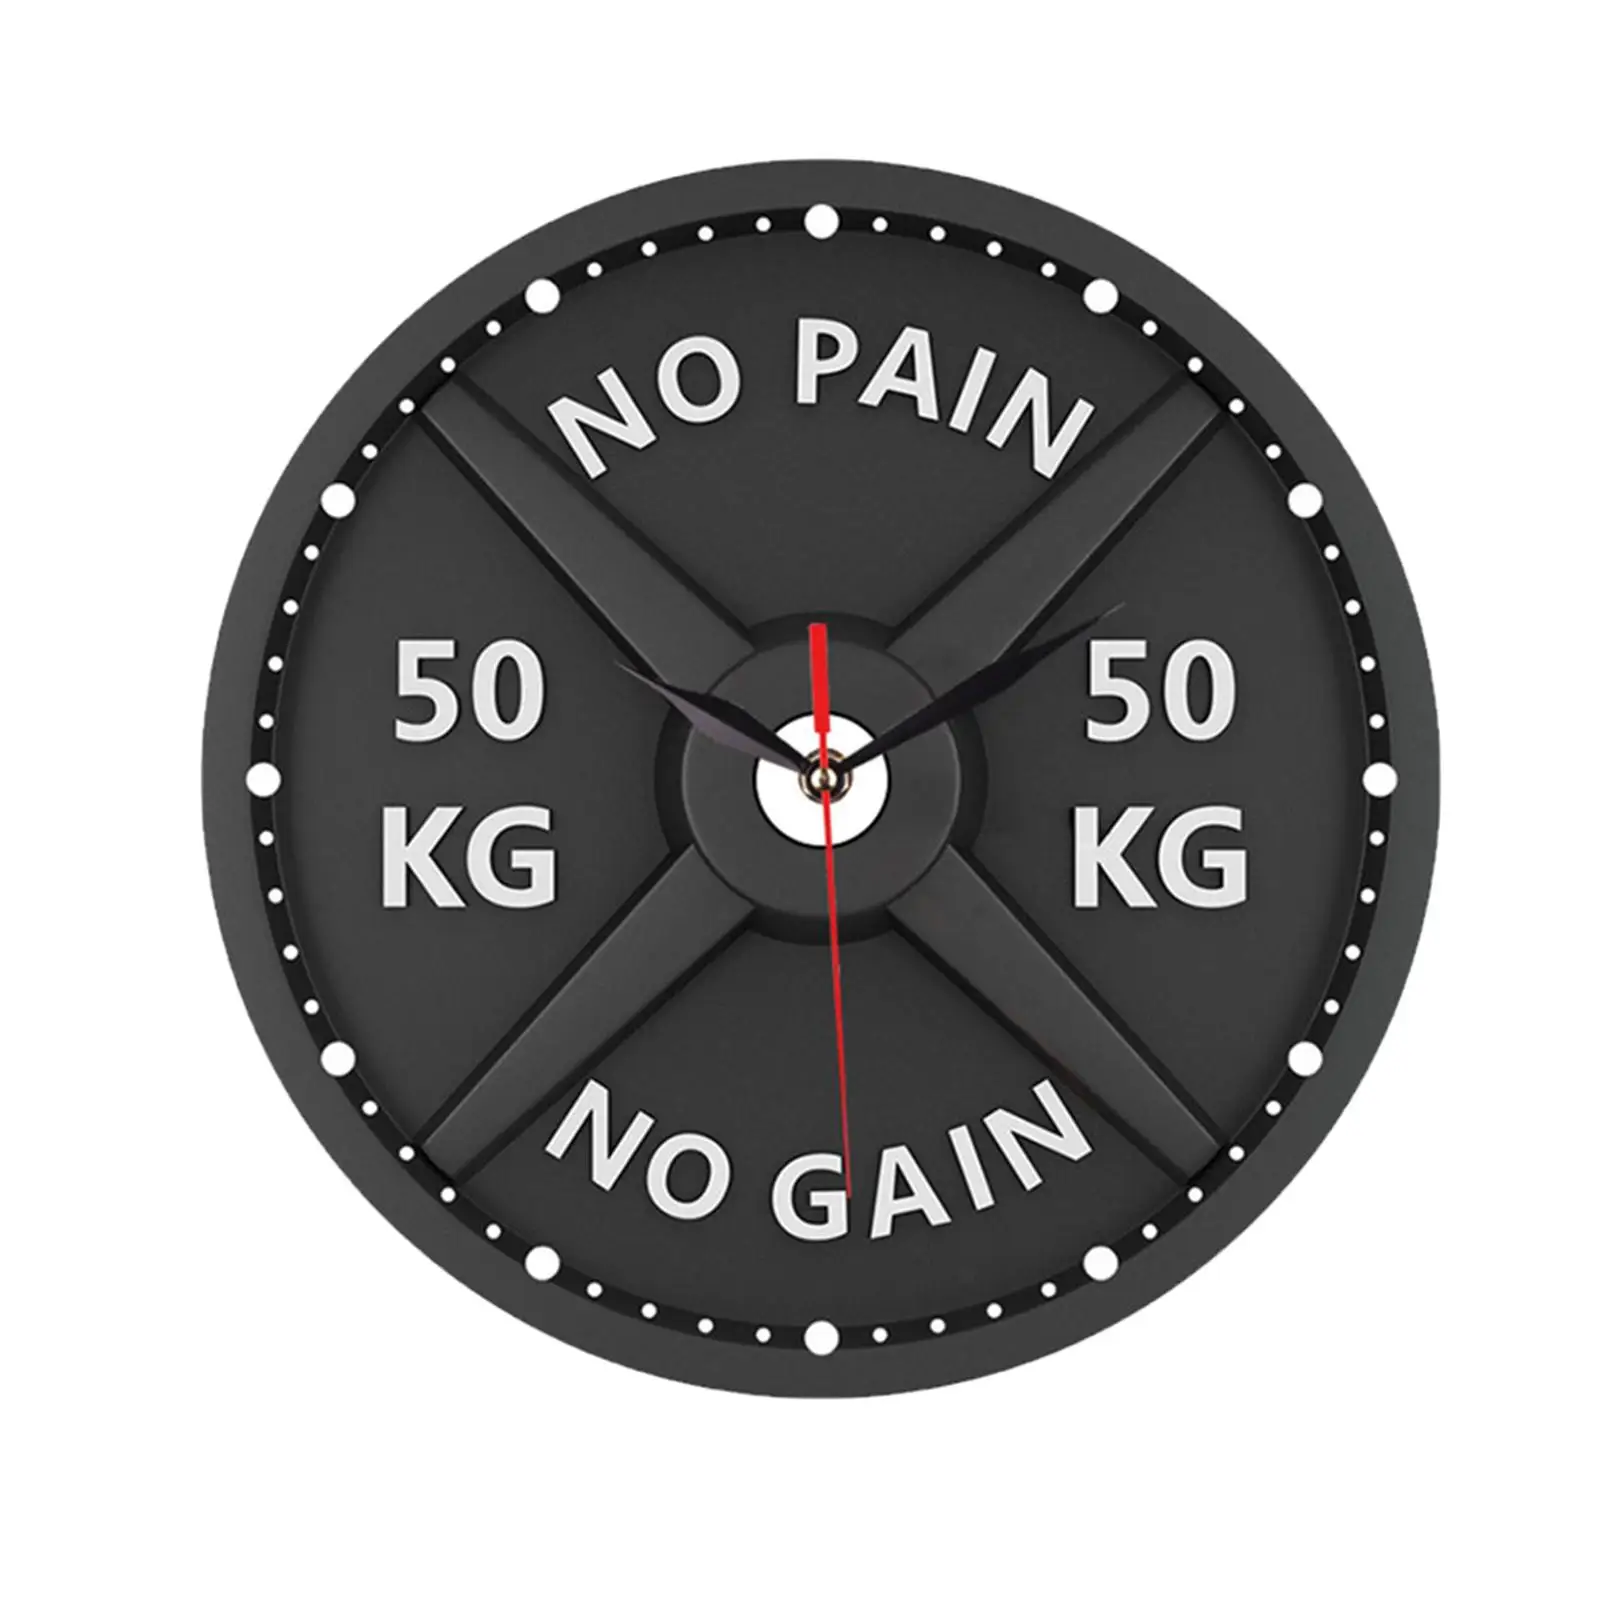 Barbell Wall Clock Modern 30cm Creative Mute Decorative Clock Watch for Home Gym Bodybuilding Fitness Workout Weight Lifting